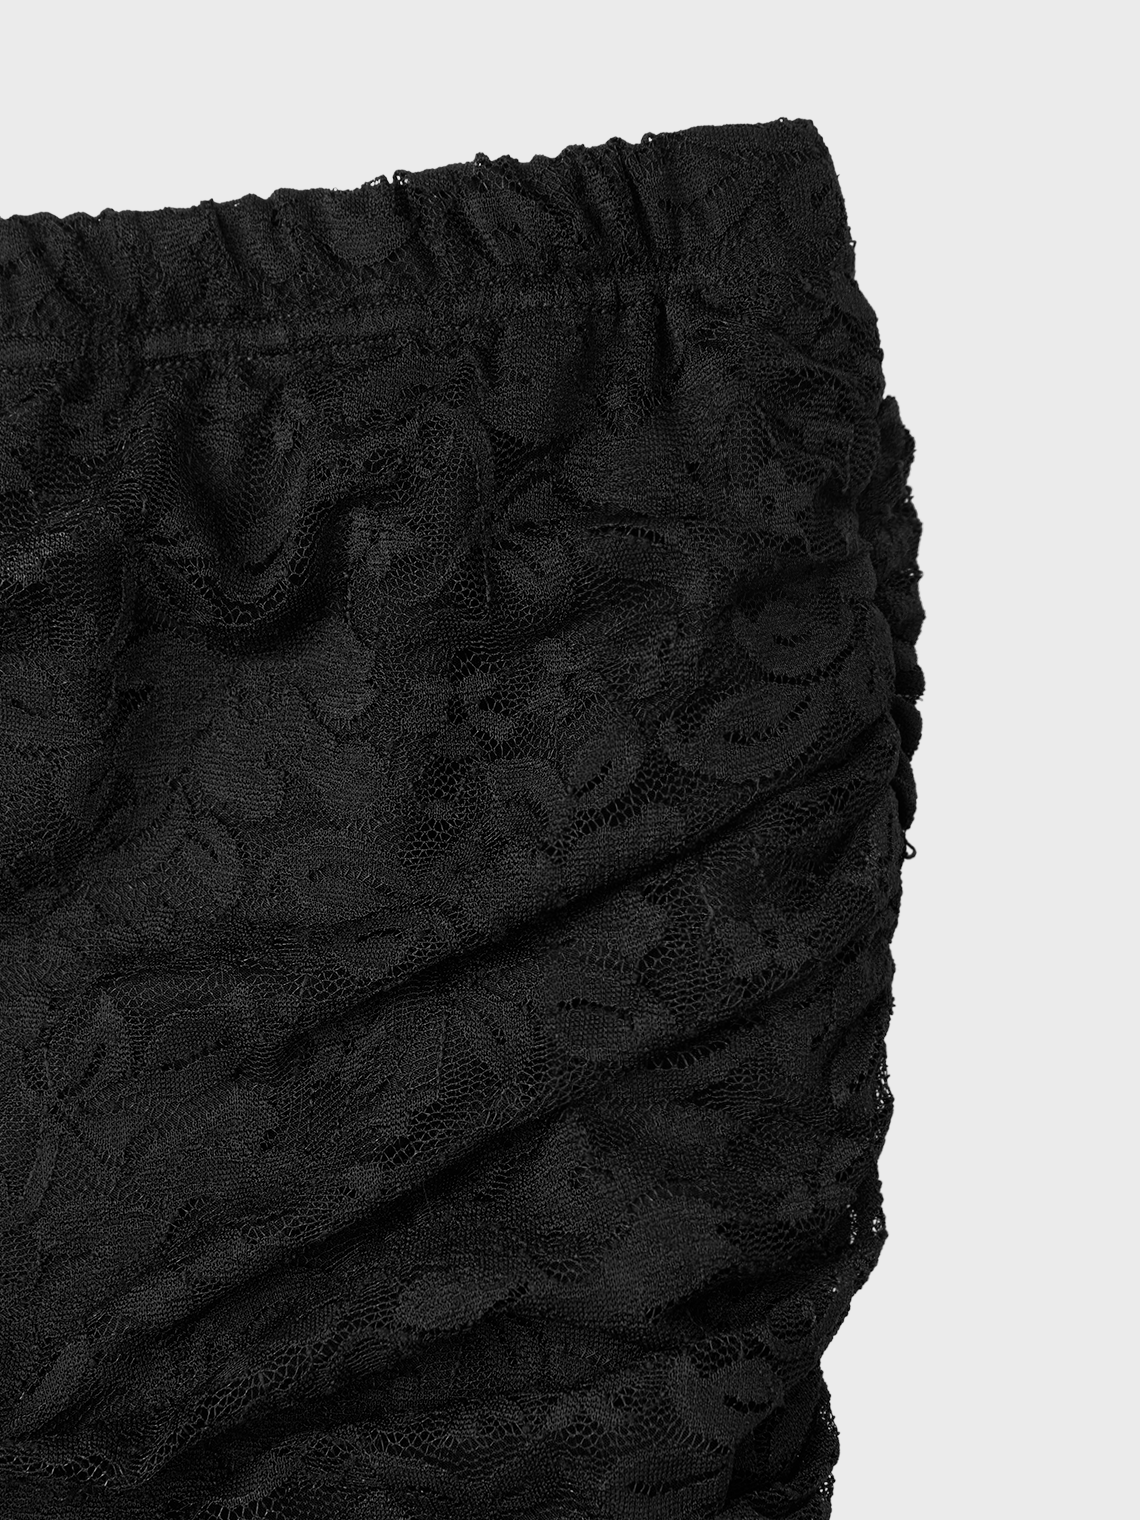 Double Layer Lace Plain Bell-Bottomtrousers Pants